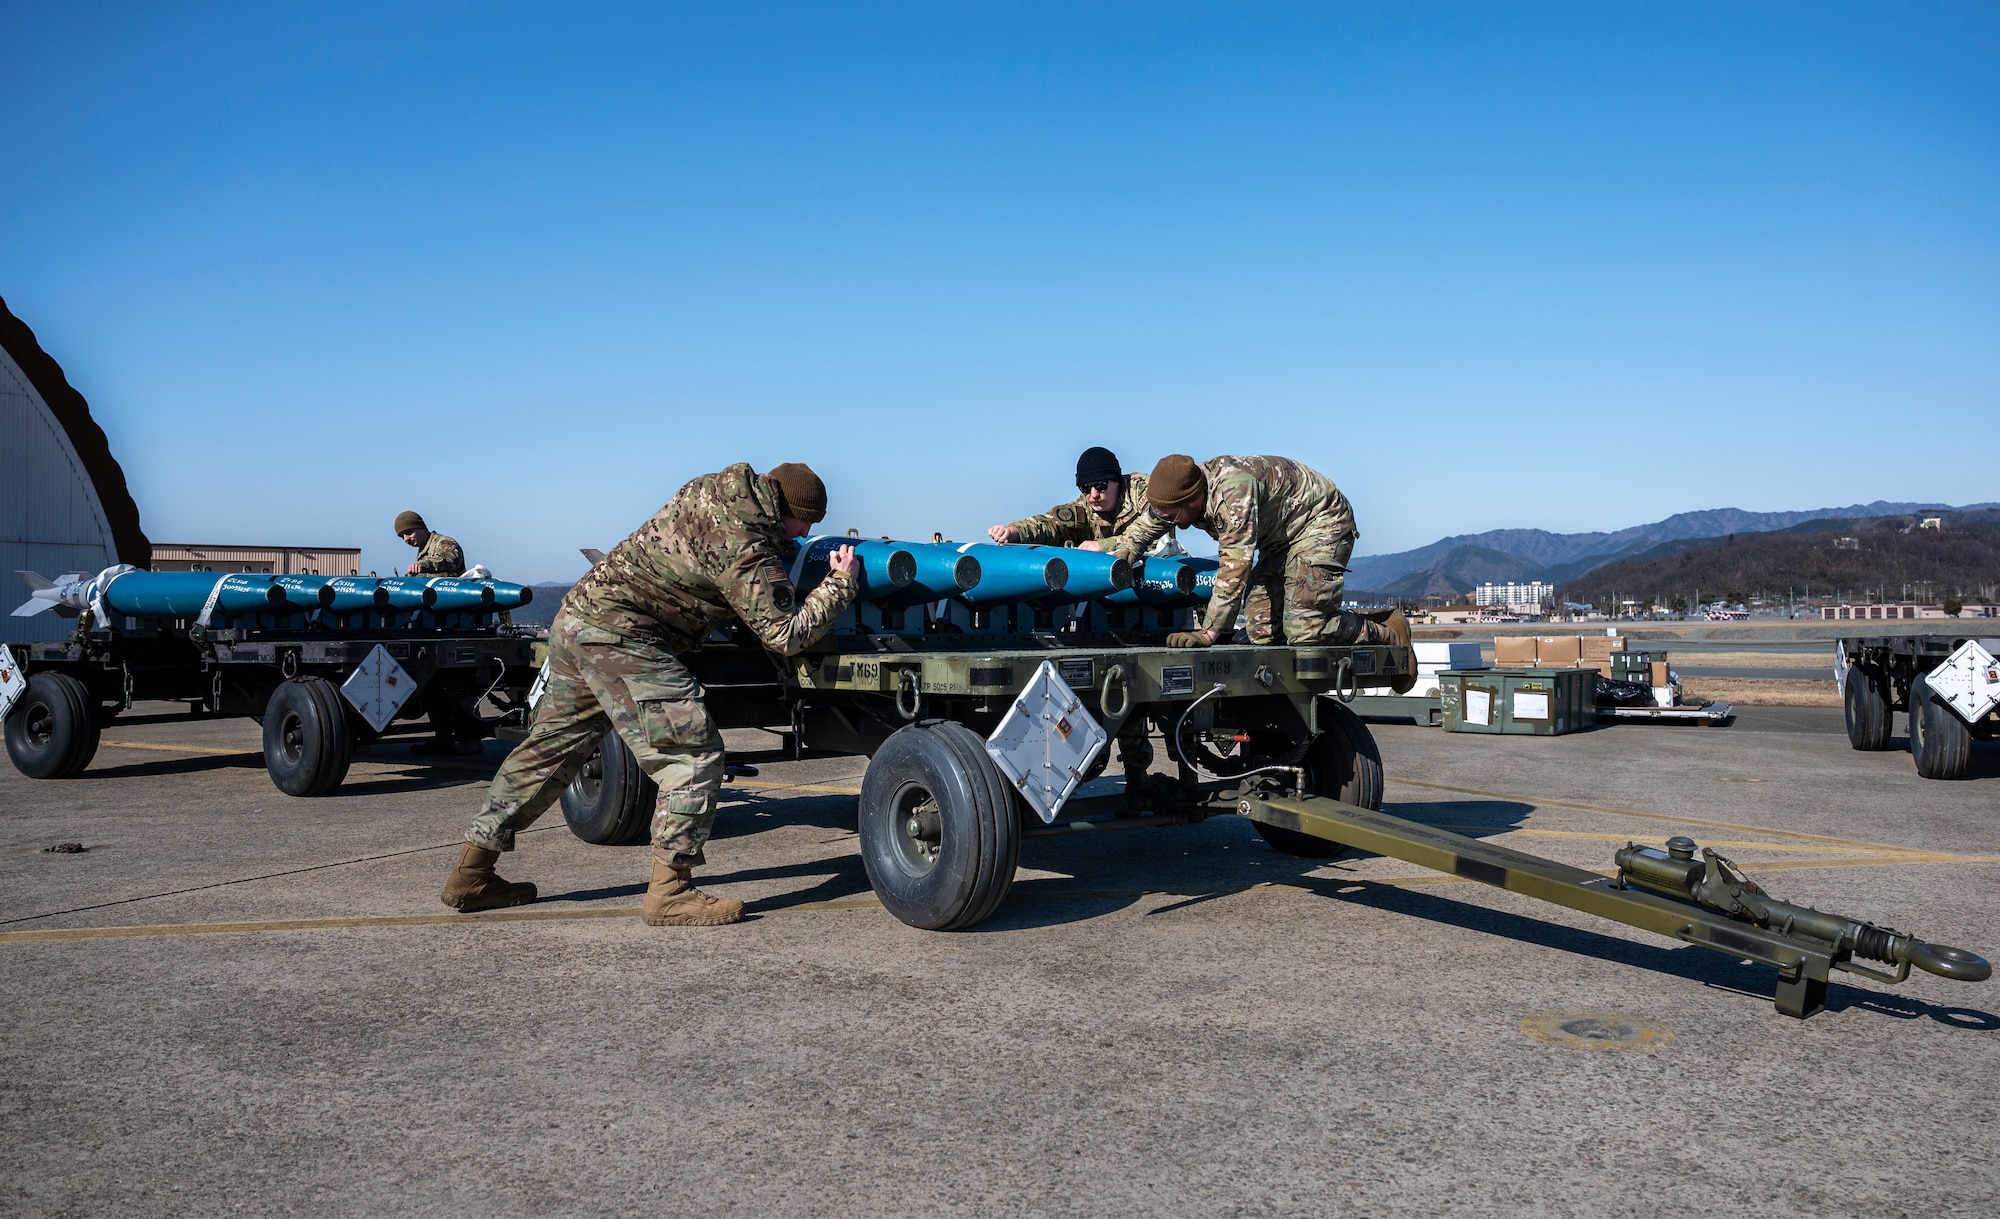 U.S. Air Force Airmen assigned to the 51st Munitions Squadron (MUNS) build and load simulated GBU-38 Joint Direct Attack Munitions during a training event at Daegu Air Base, Republic of Korea, Jan. 30, 2023.